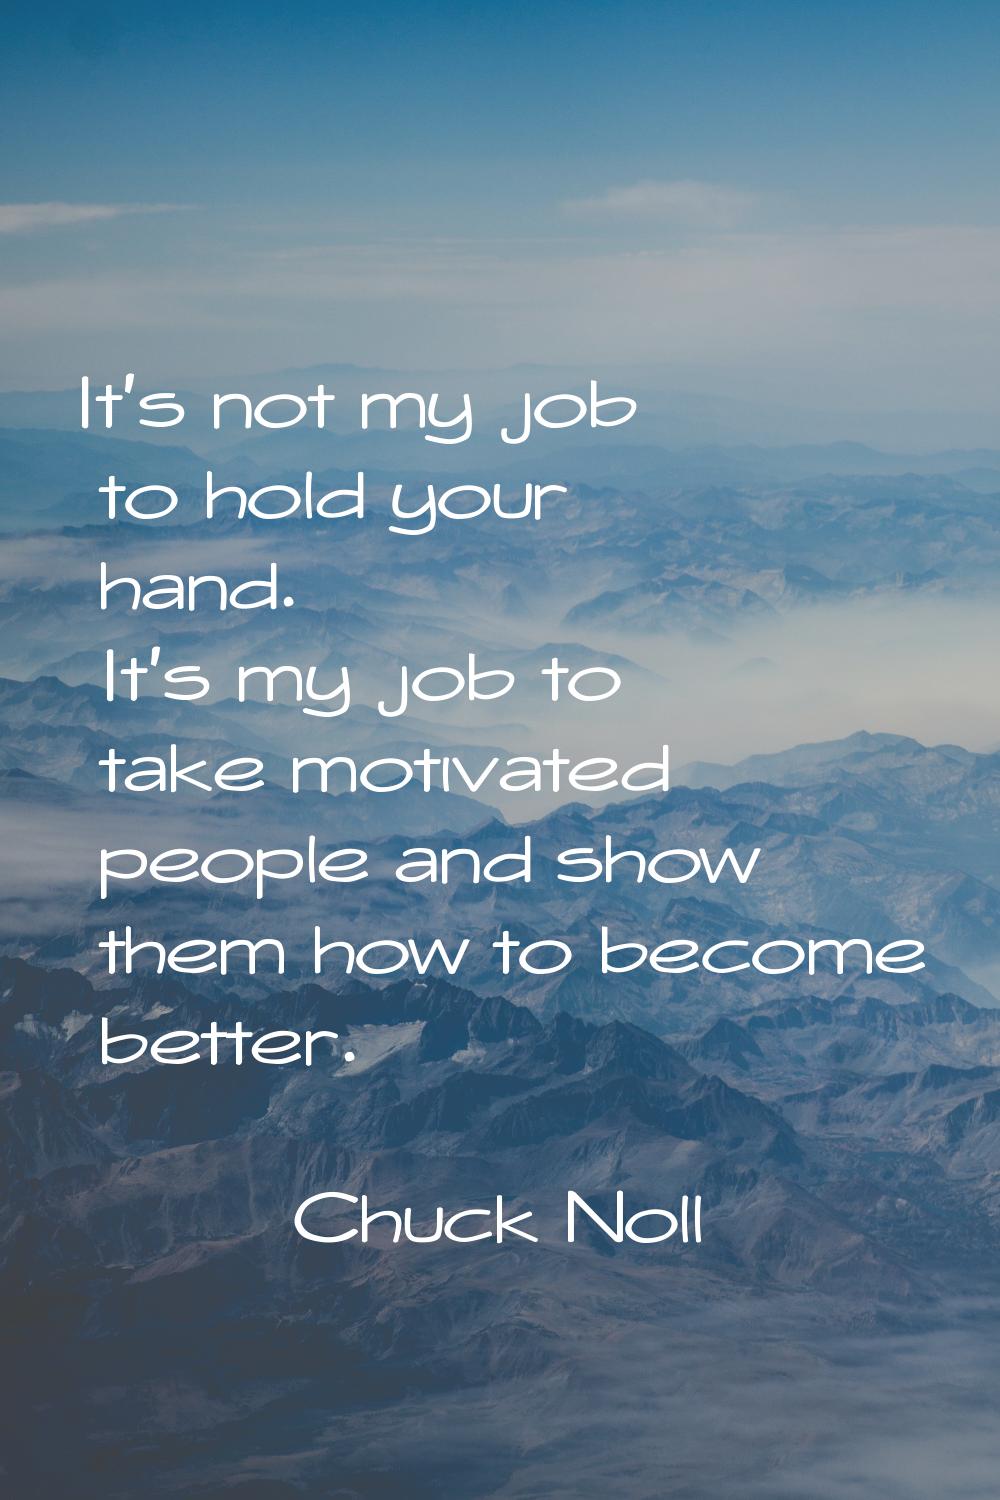 It's not my job to hold your hand. It's my job to take motivated people and show them how to become